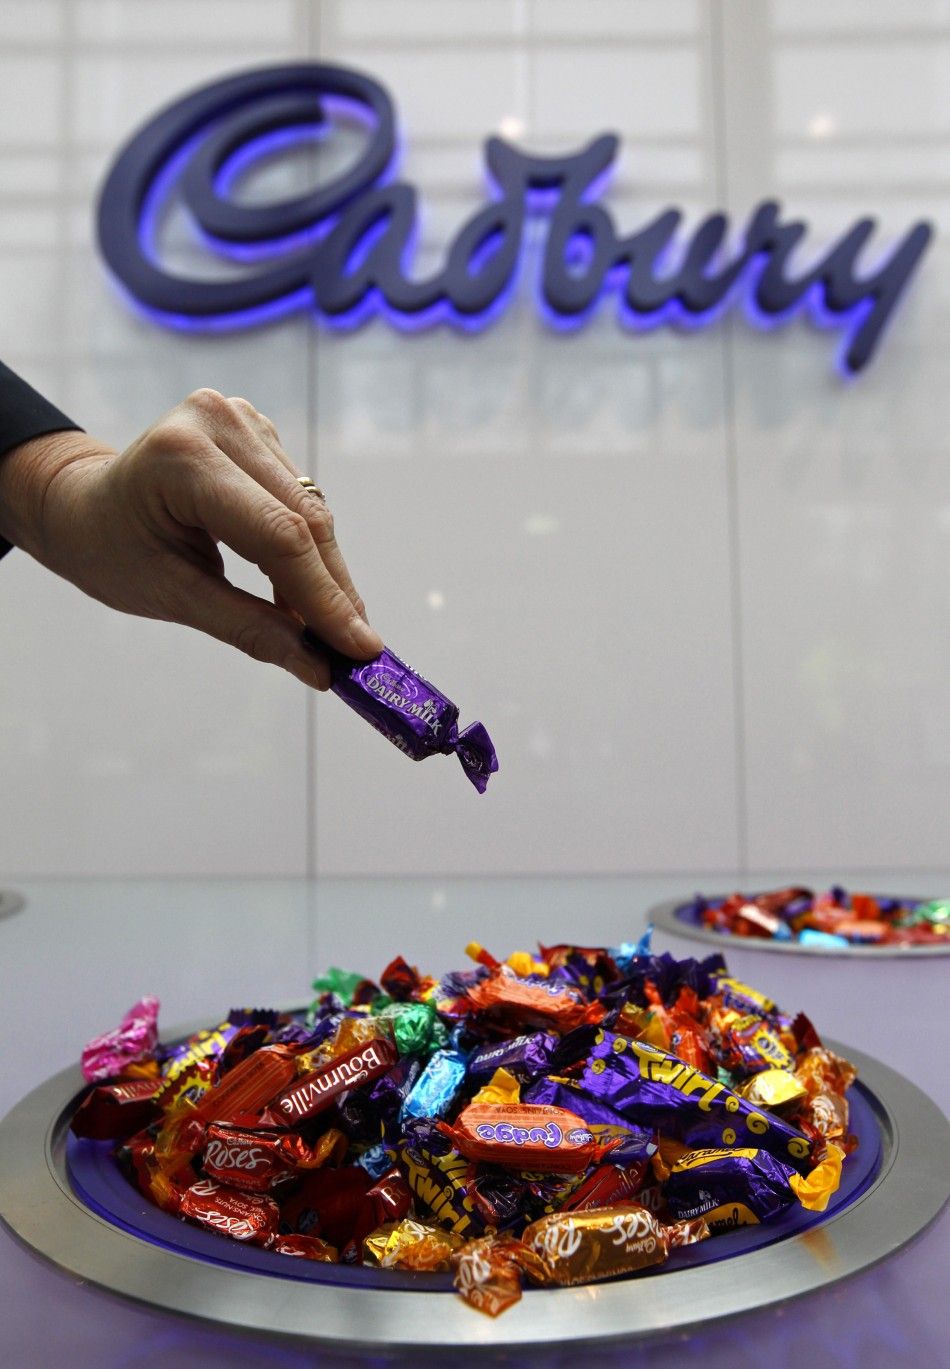 A woman takes a chocolate from a bowl at the Cadbury factory